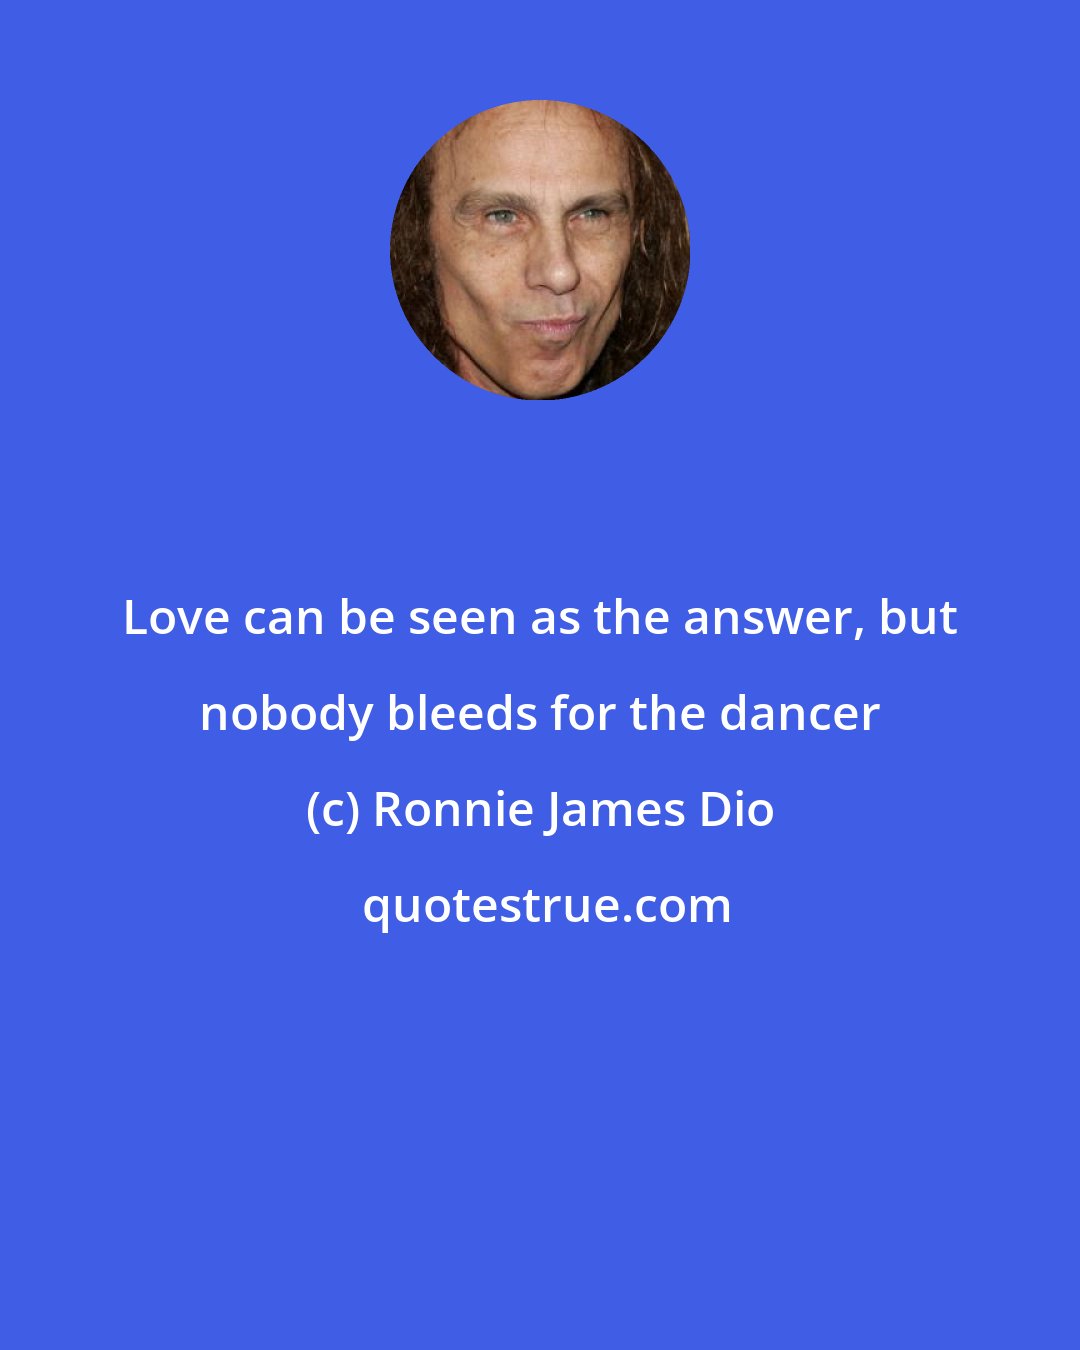 Ronnie James Dio: Love can be seen as the answer, but nobody bleeds for the dancer